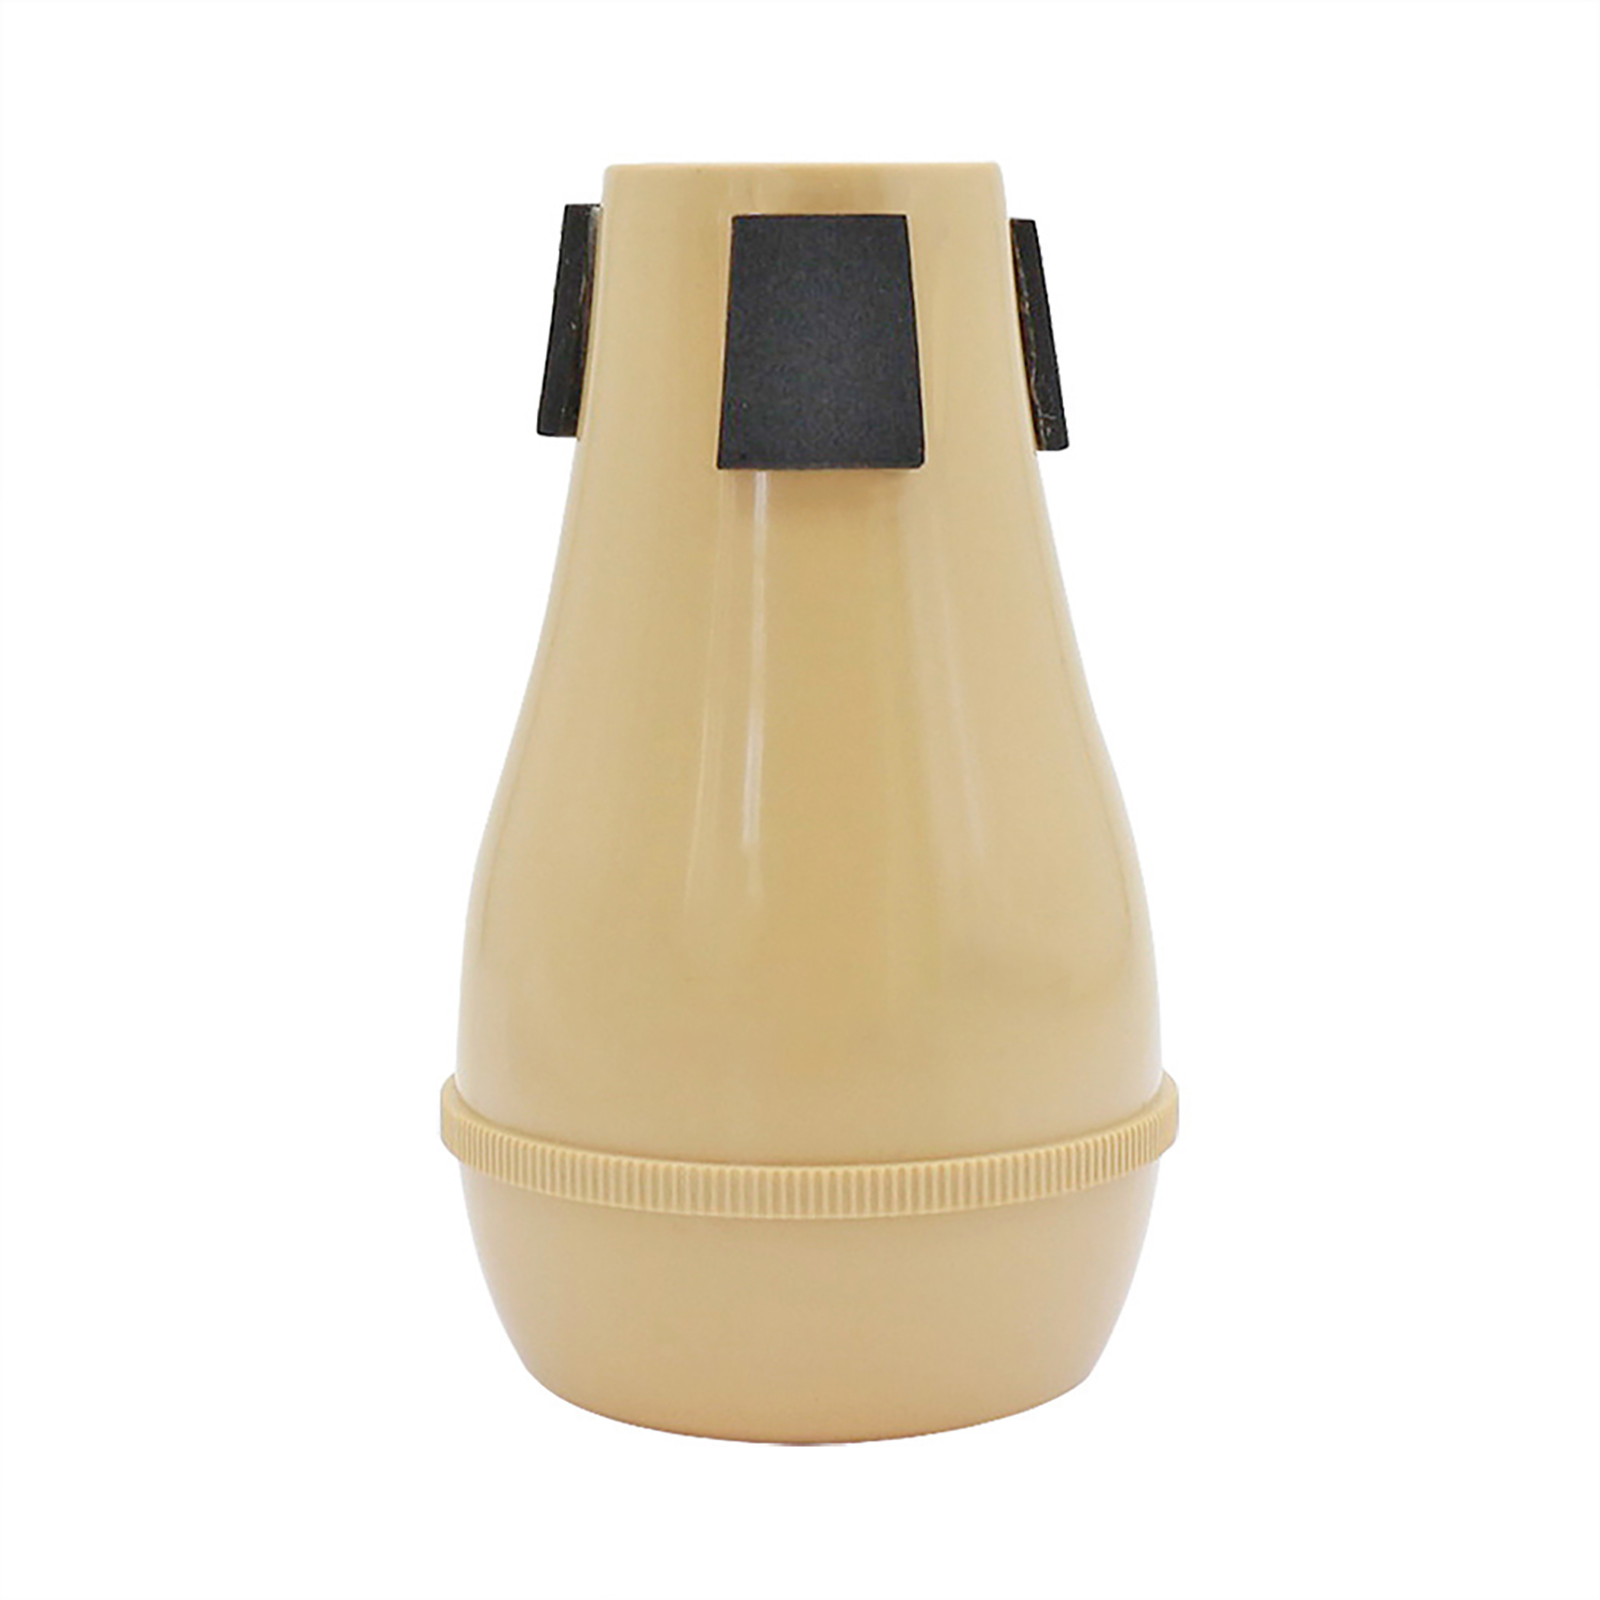 Alto Tenor Trombone Mute Lightweight Straight Mute Muffler Silencer Parts For Stage Performance Practice